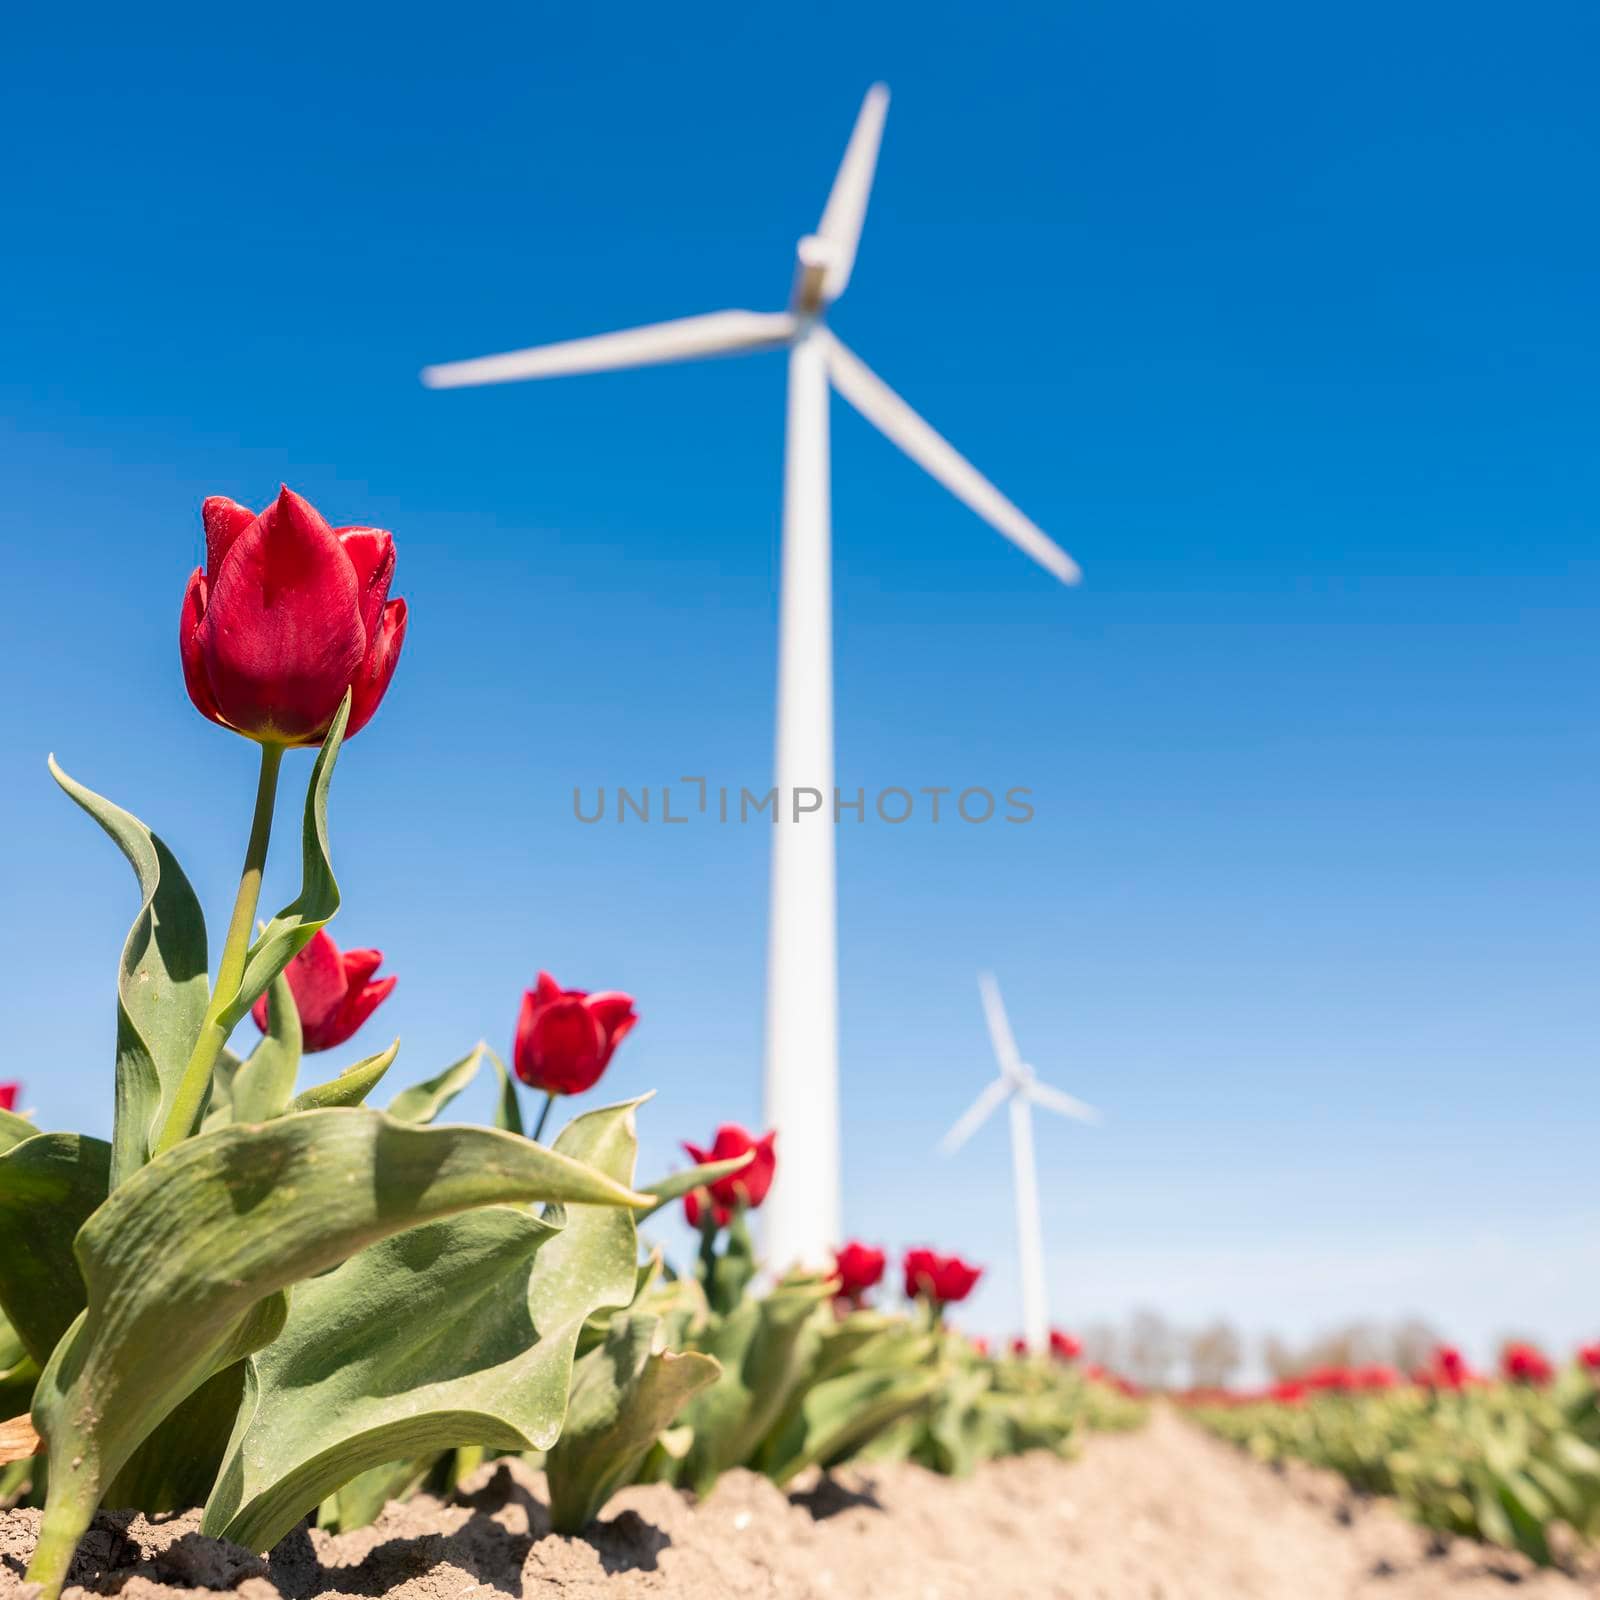 closeup of red tulips under blue sky with wind turbine in the background